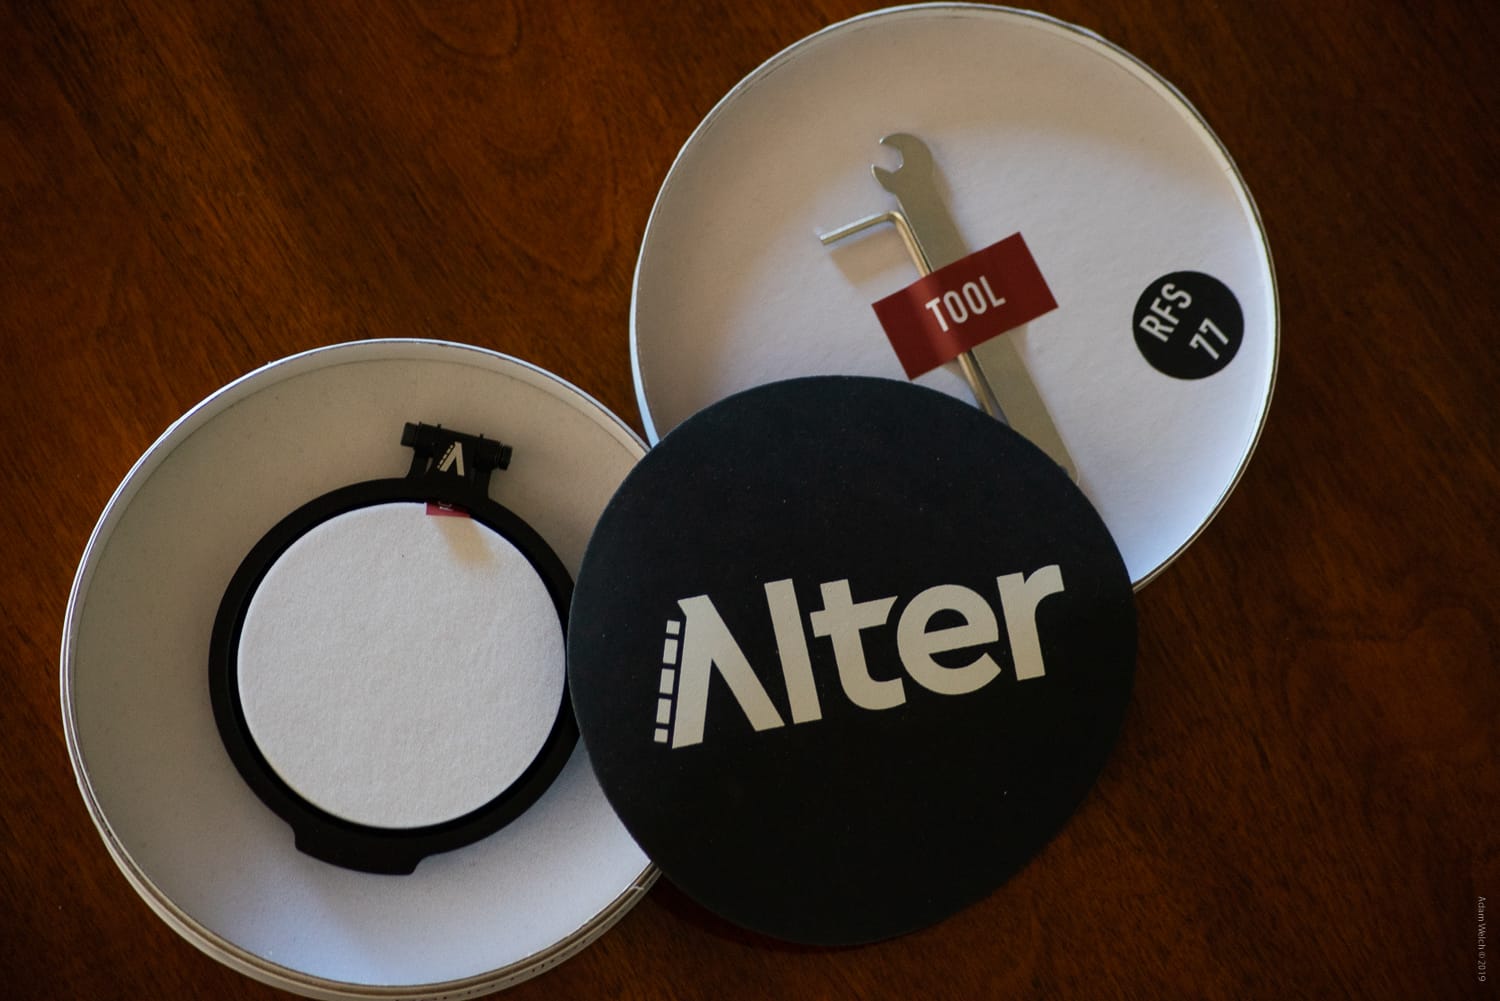 Hands-On Review of the Alter Rapid Filter System